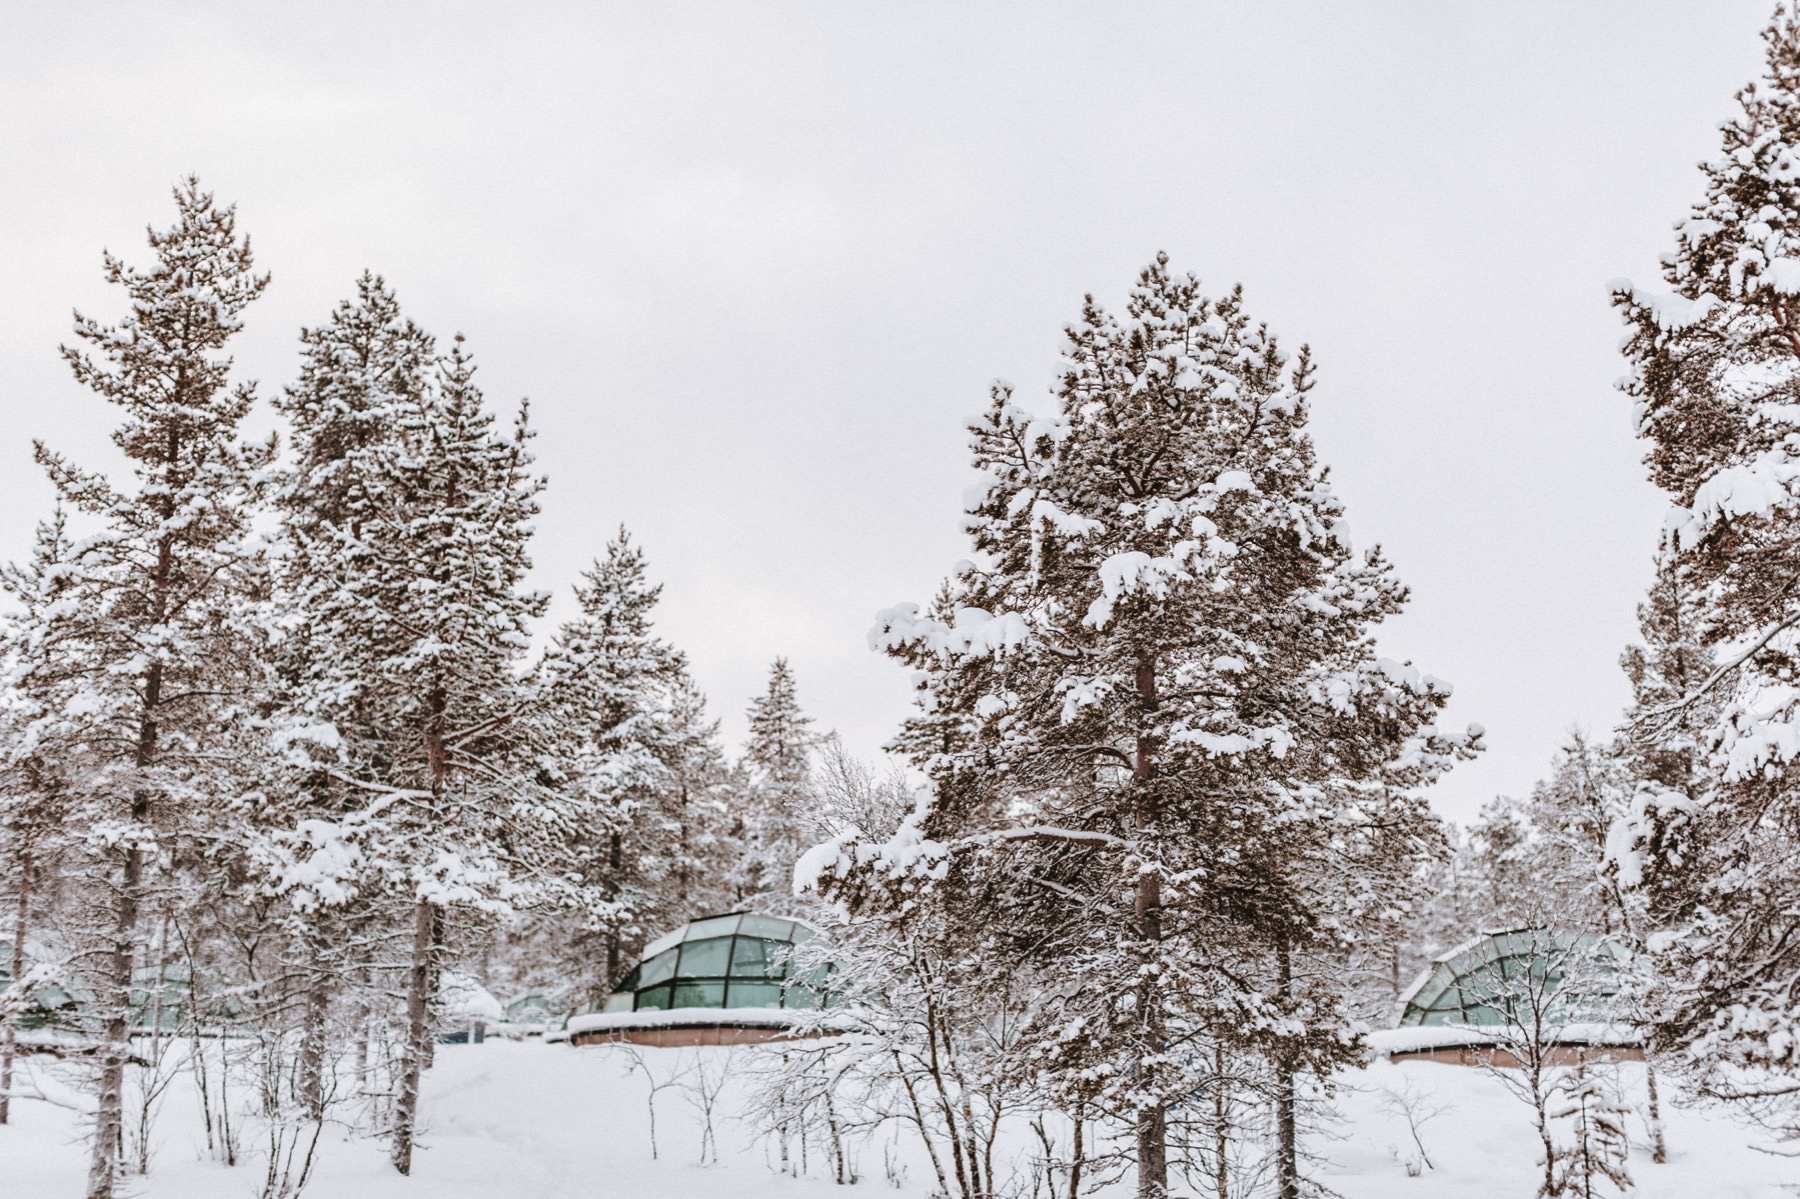 gloo Hotel in Lapland